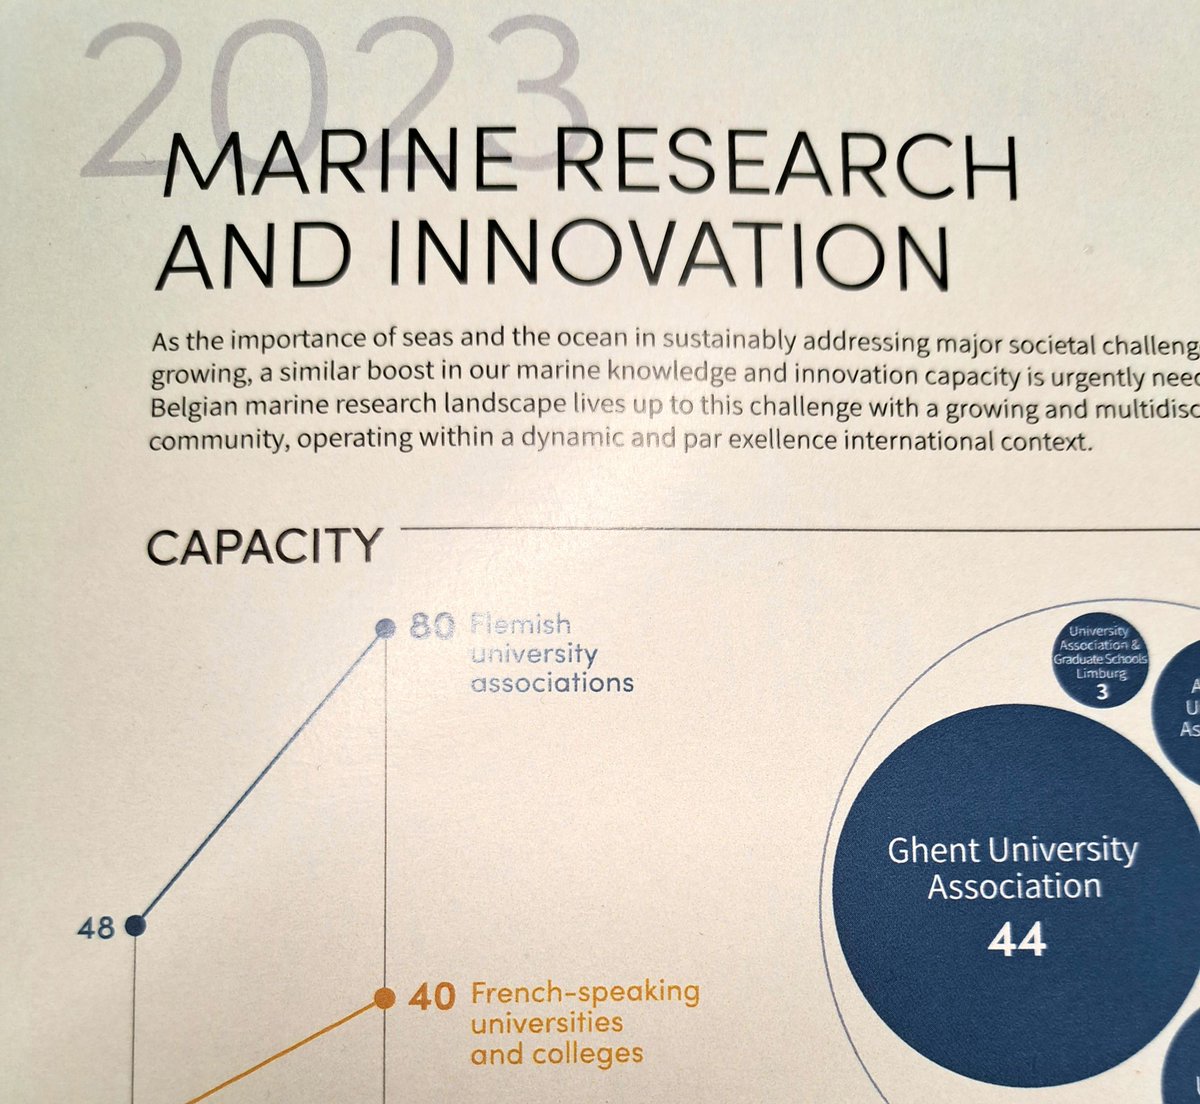 Big day tomorrow for @CompendiumVliz @VLIZnews! 🤩 New #Compendium #IndicatorReport Marine Research and Innovation 2023 and #ExpertGuide Marine Research 2023 coming your way! #IndicatorReport2023 #ExpertGuide2023 #UNDOSSD #MissionOcean #SDG14 #MarineScience #BlueGrowth